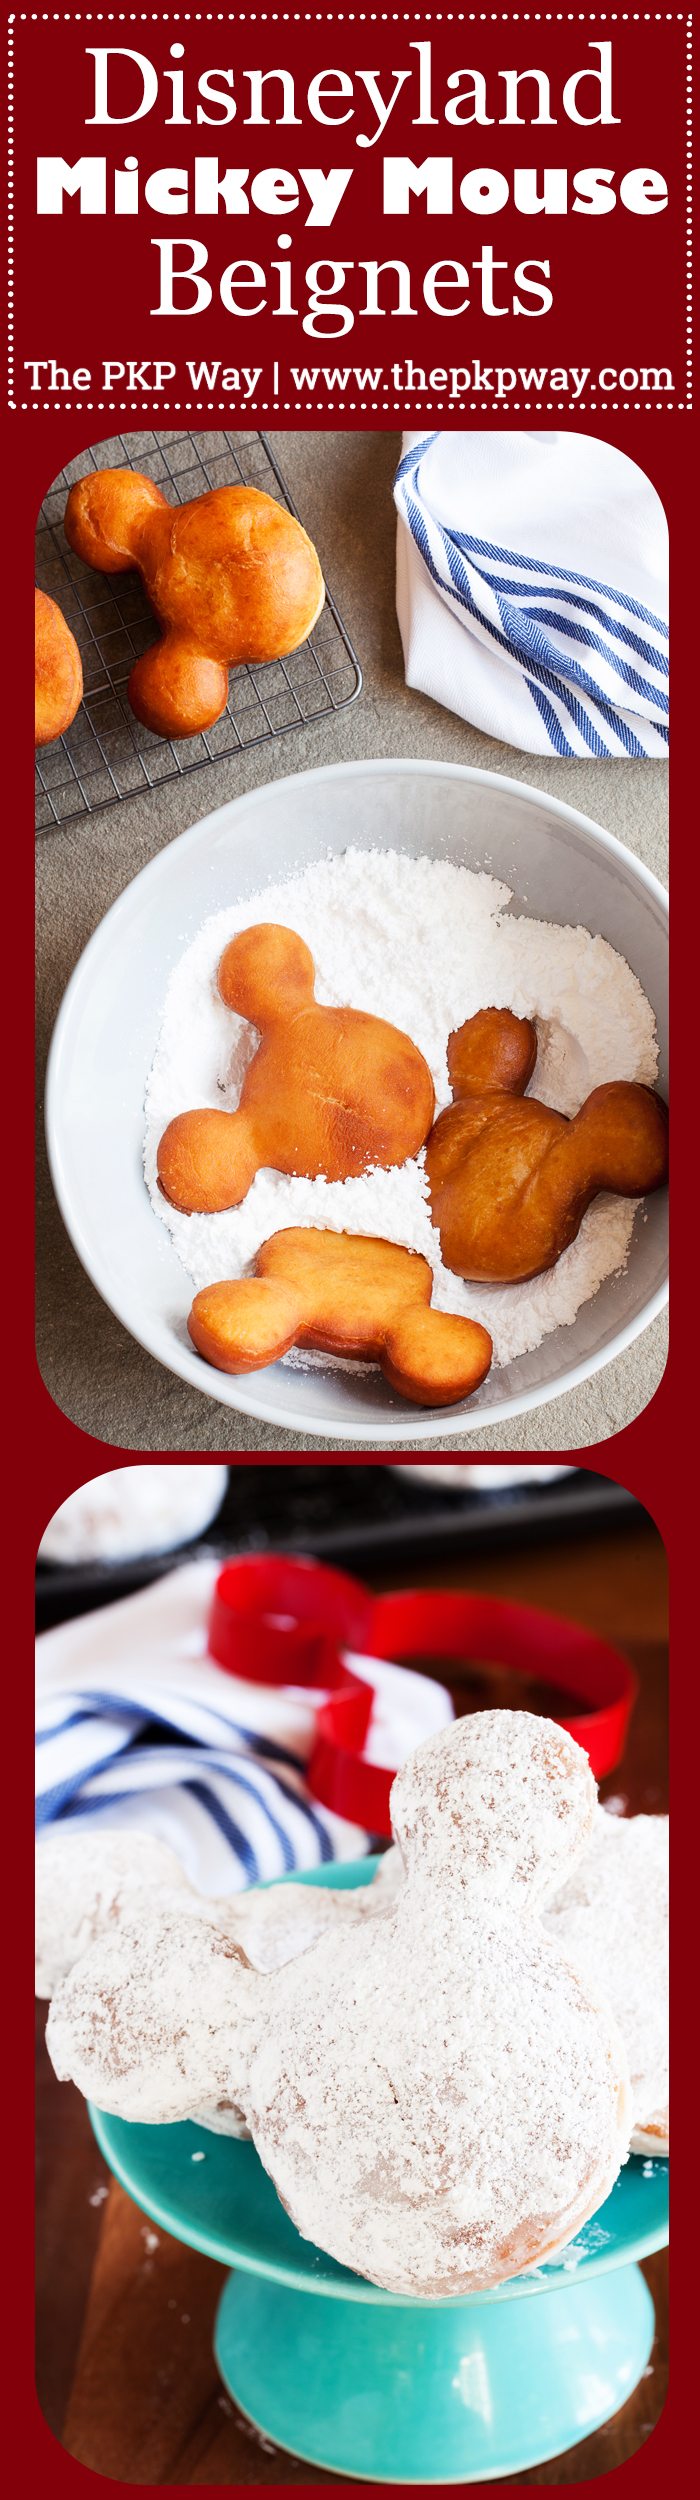 Disneyland Mickey Mouse Beignets are a must on every Disneyland trip and now you can make them at home with the original recipe and my tips for success! 